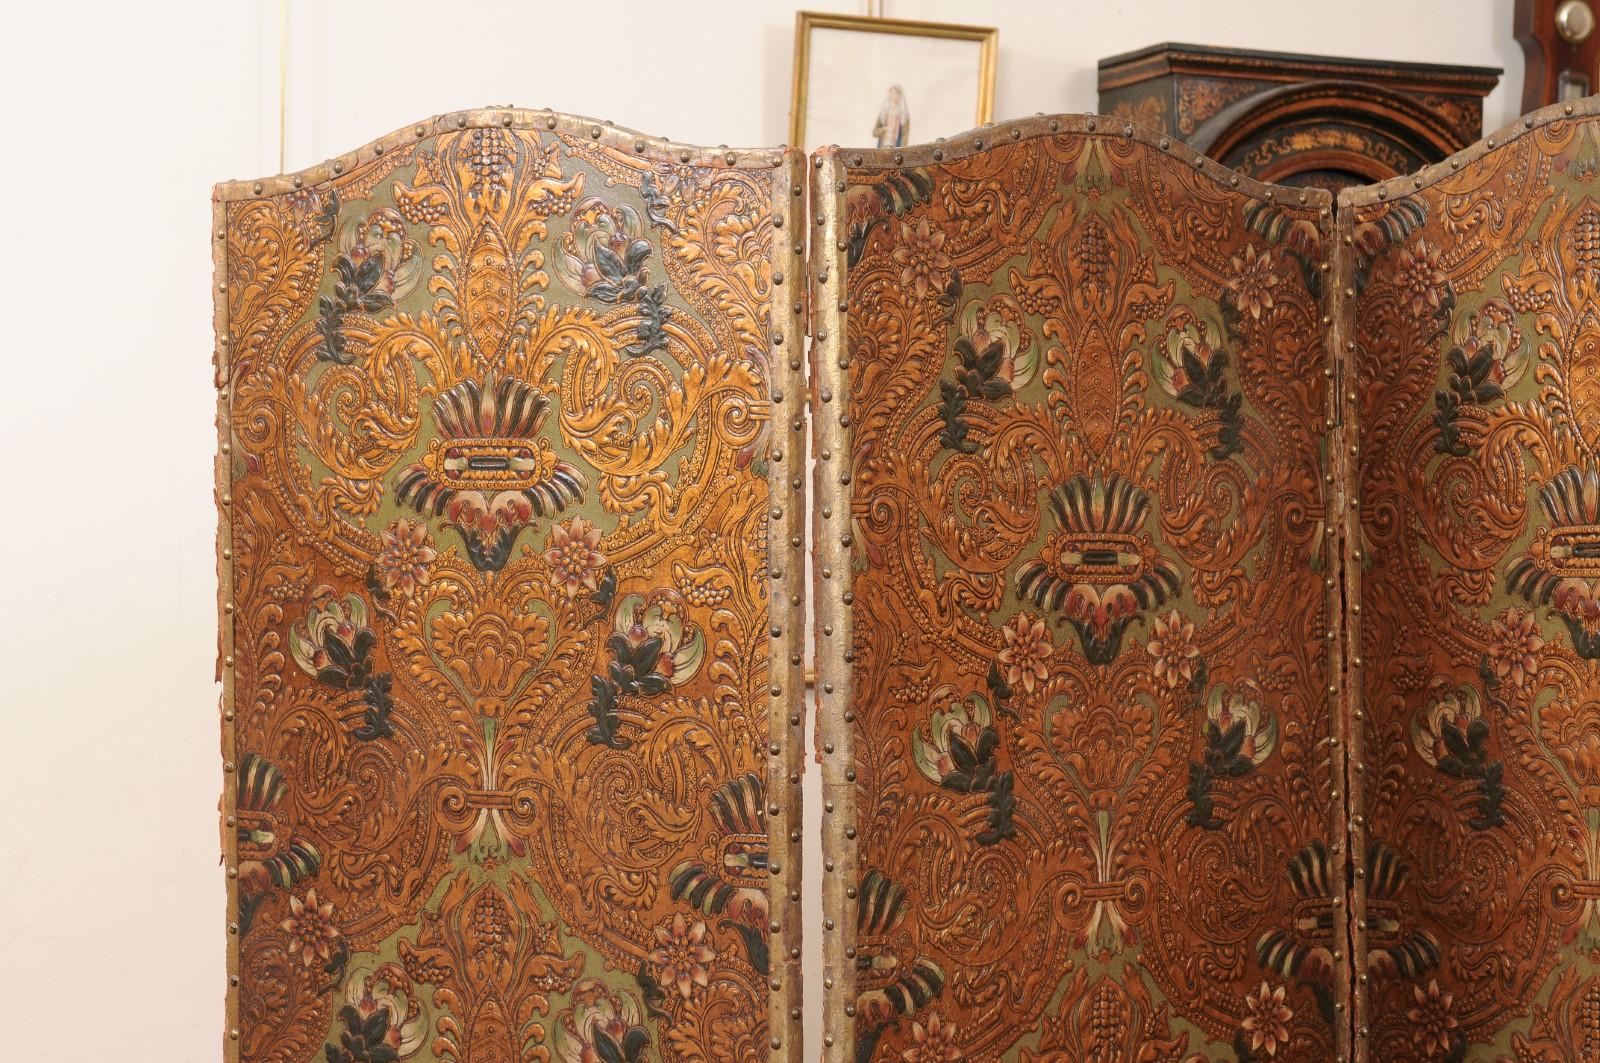  19th Century French 4 Panel Embossed & Painted Folding Screen For Sale 3